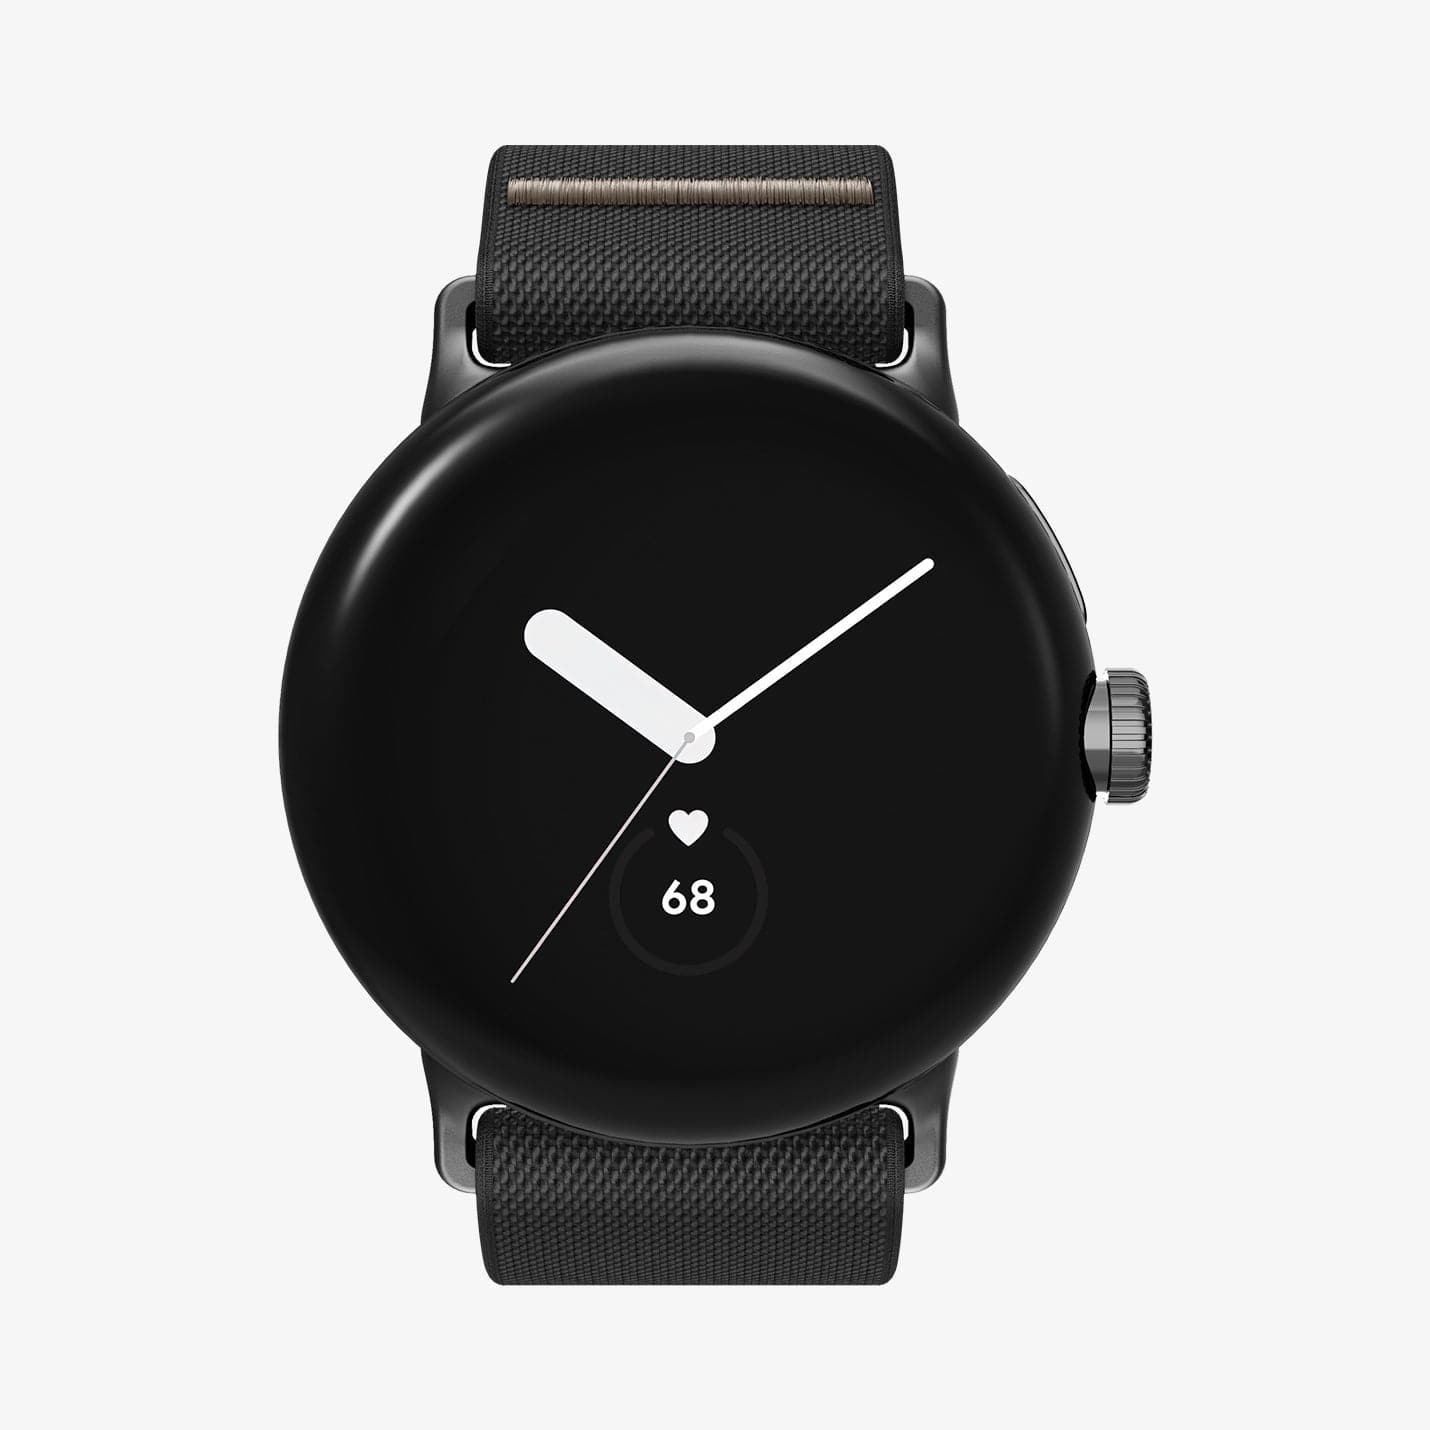 AMP06348 - Pixel Watch Series Case Lite Fit in black showing the front